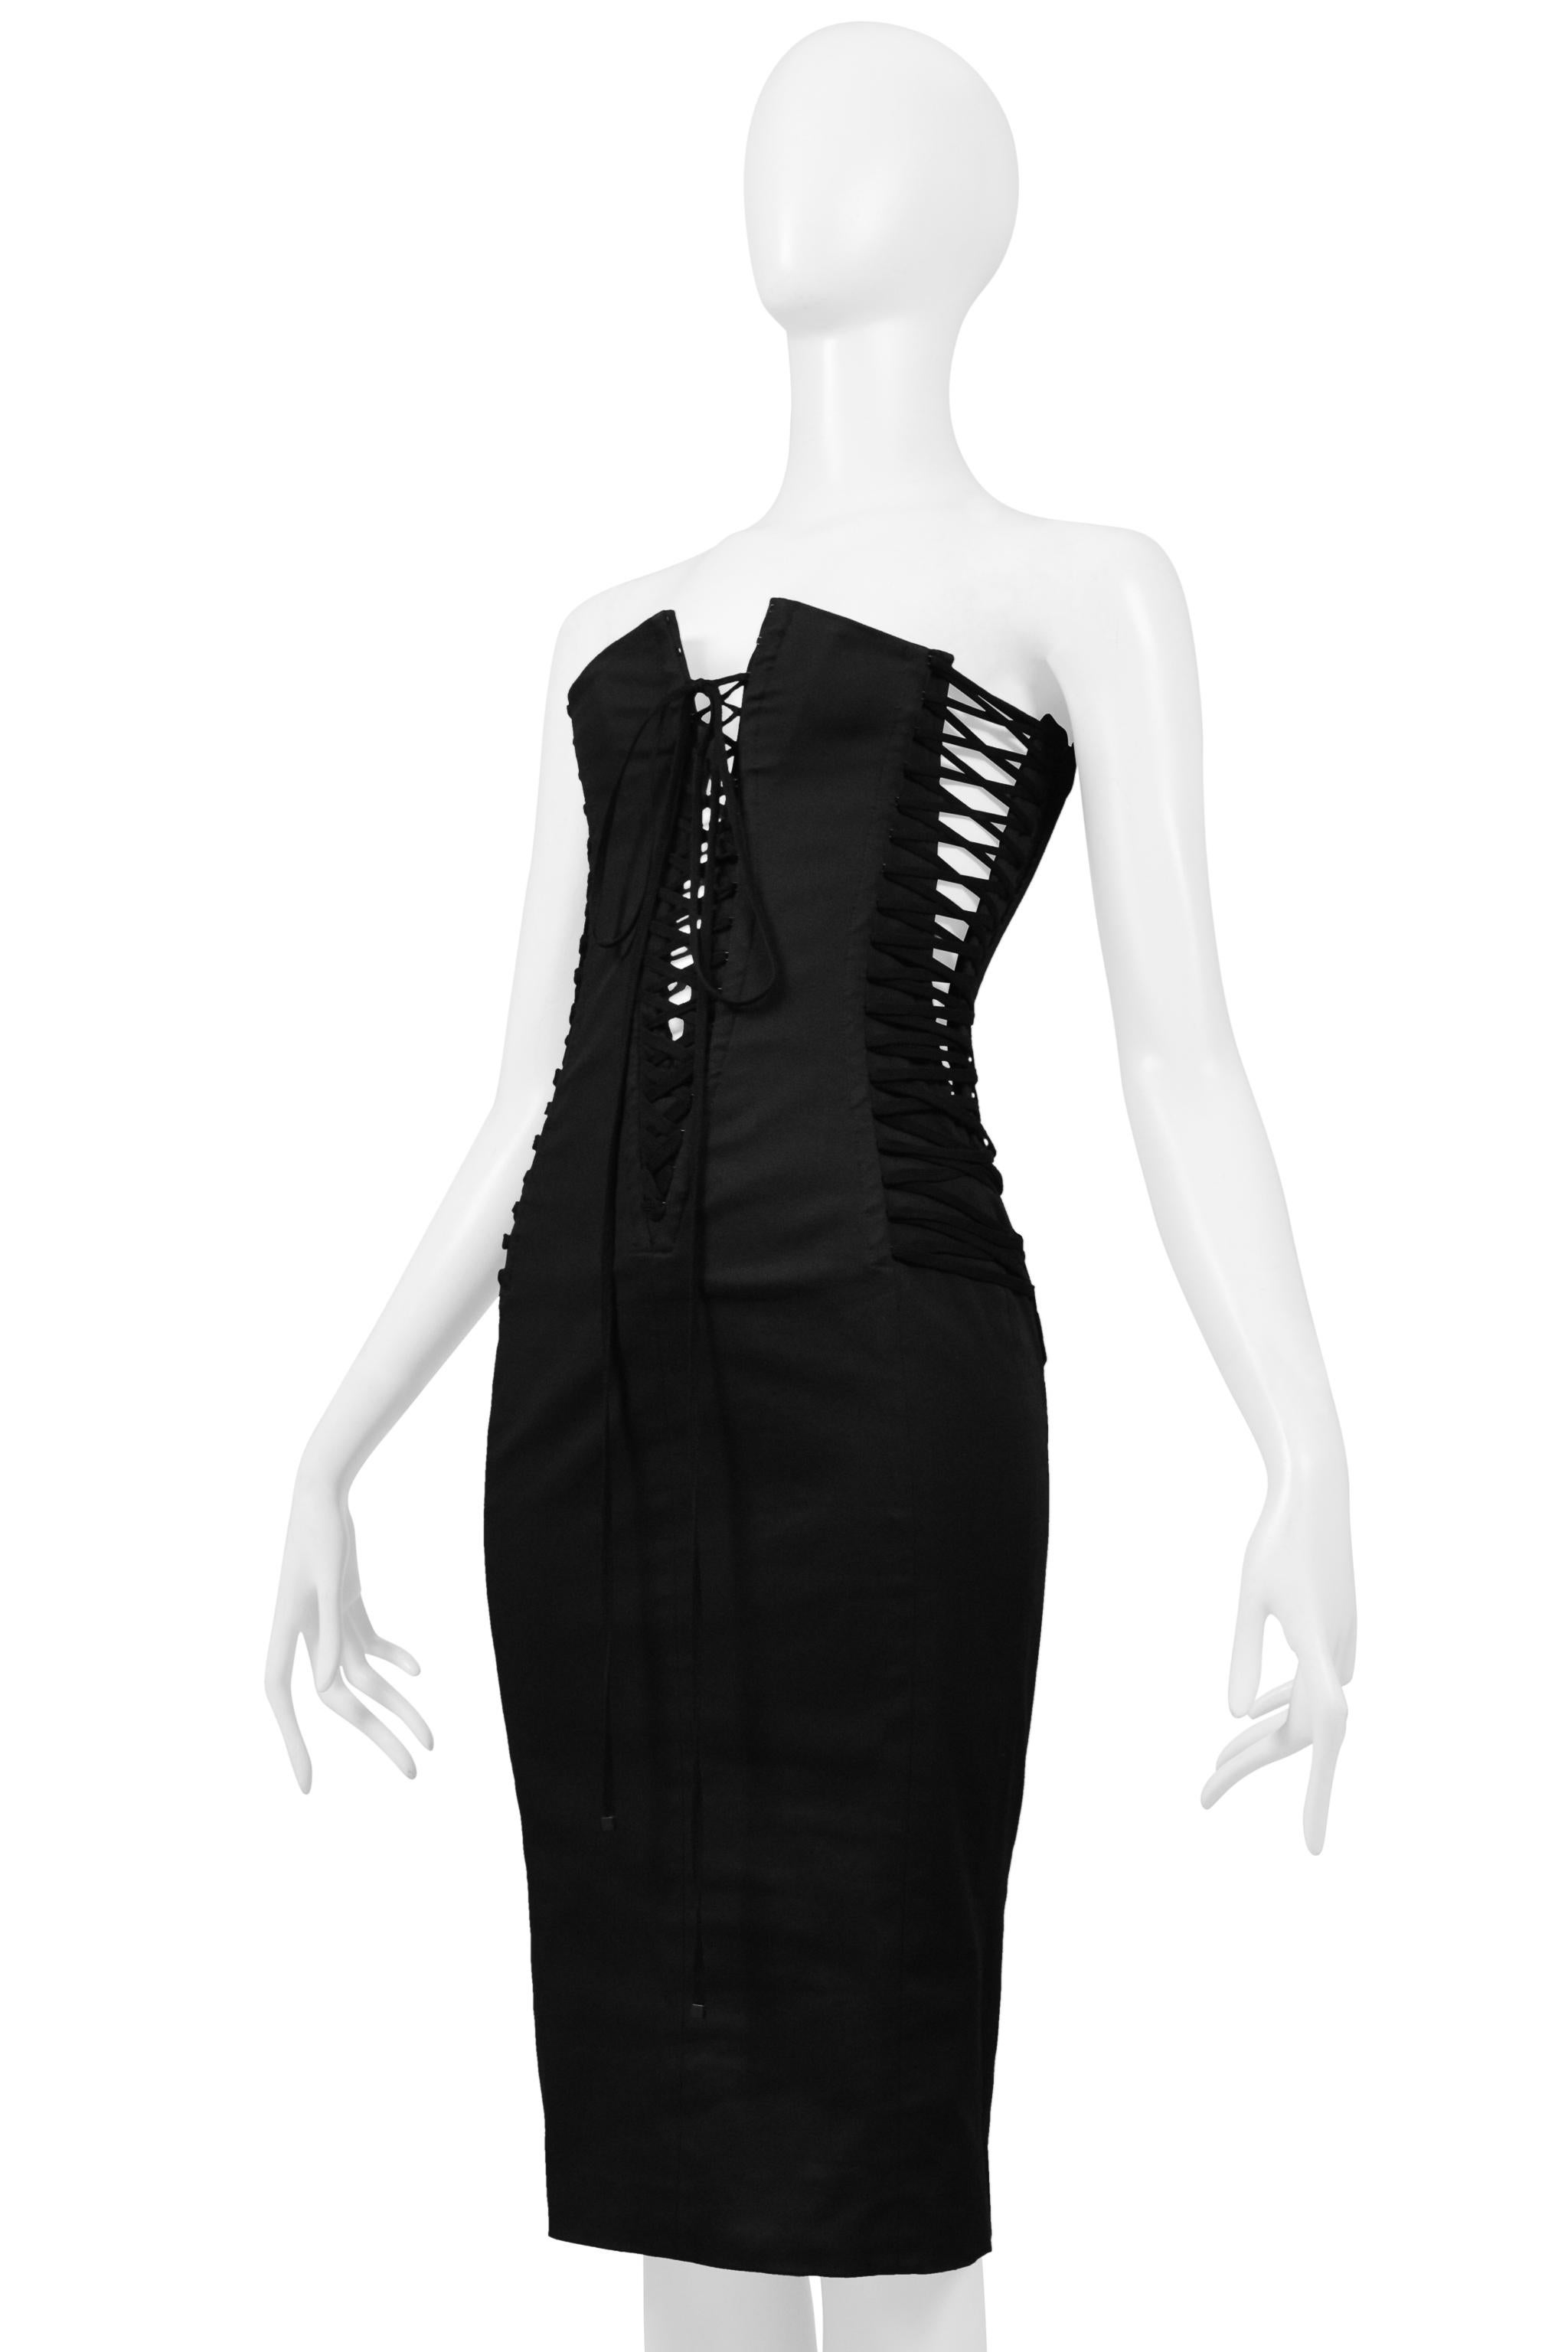 Dolce & Gabbana Black Strapless Corset Dress 2002 In Excellent Condition For Sale In Los Angeles, CA